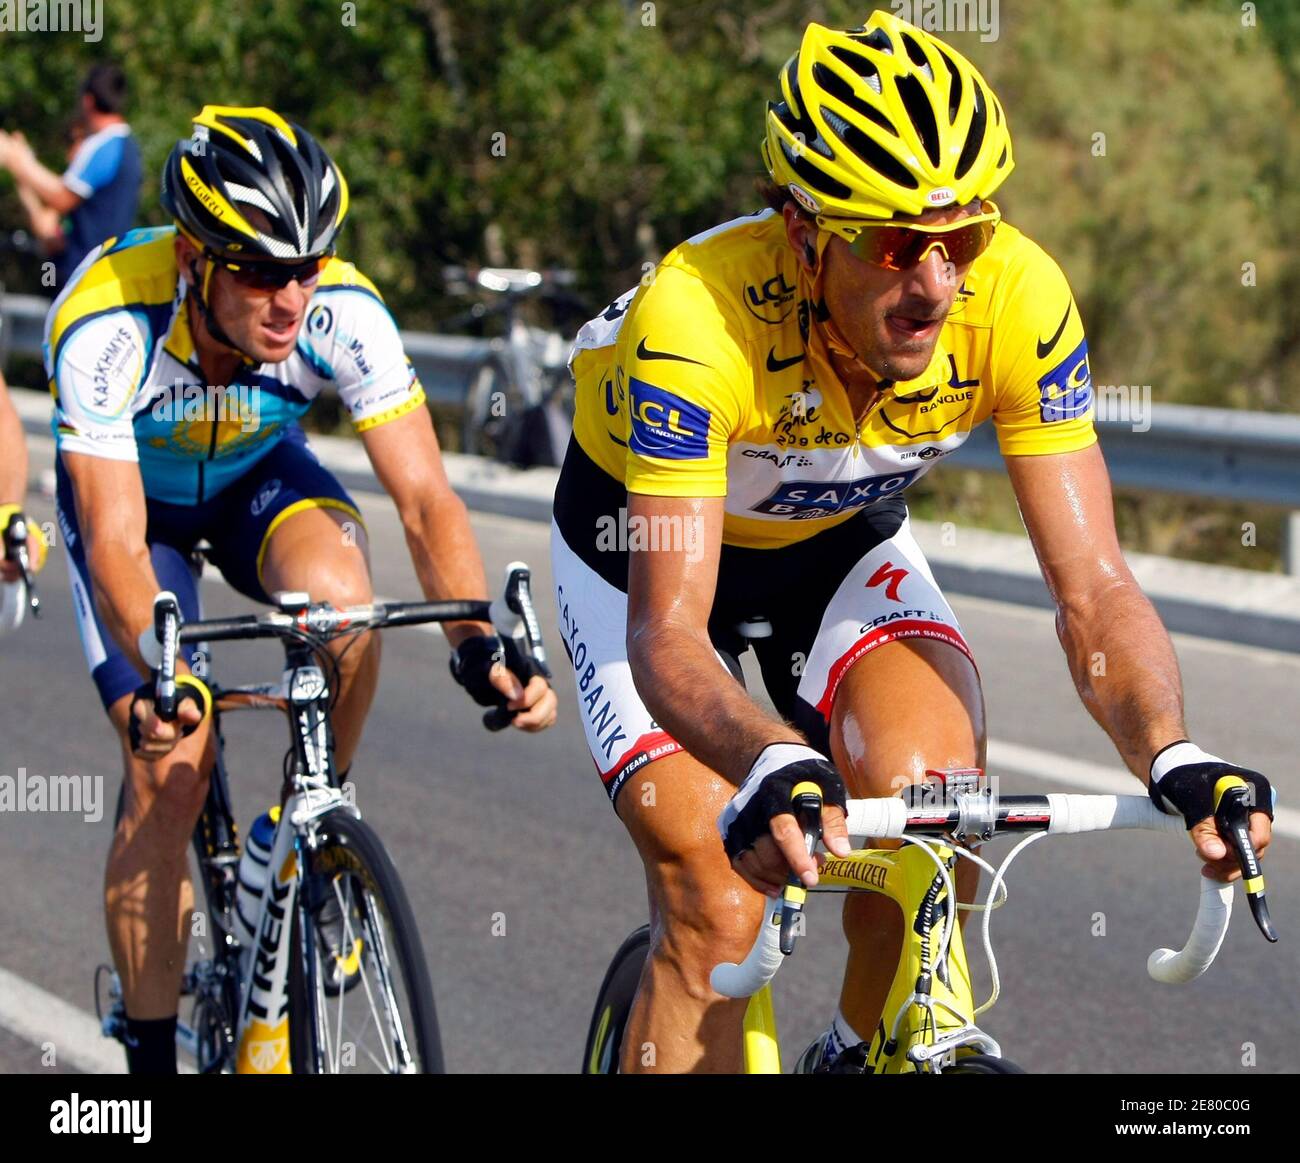 Team Saxo Bank rider and leader's yellow jersey Fabian Cancellara of  Switzerland (R) cycles with Astana rider Lance Armstrong of the U.S. (L)  during the third stage of the 96th Tour de